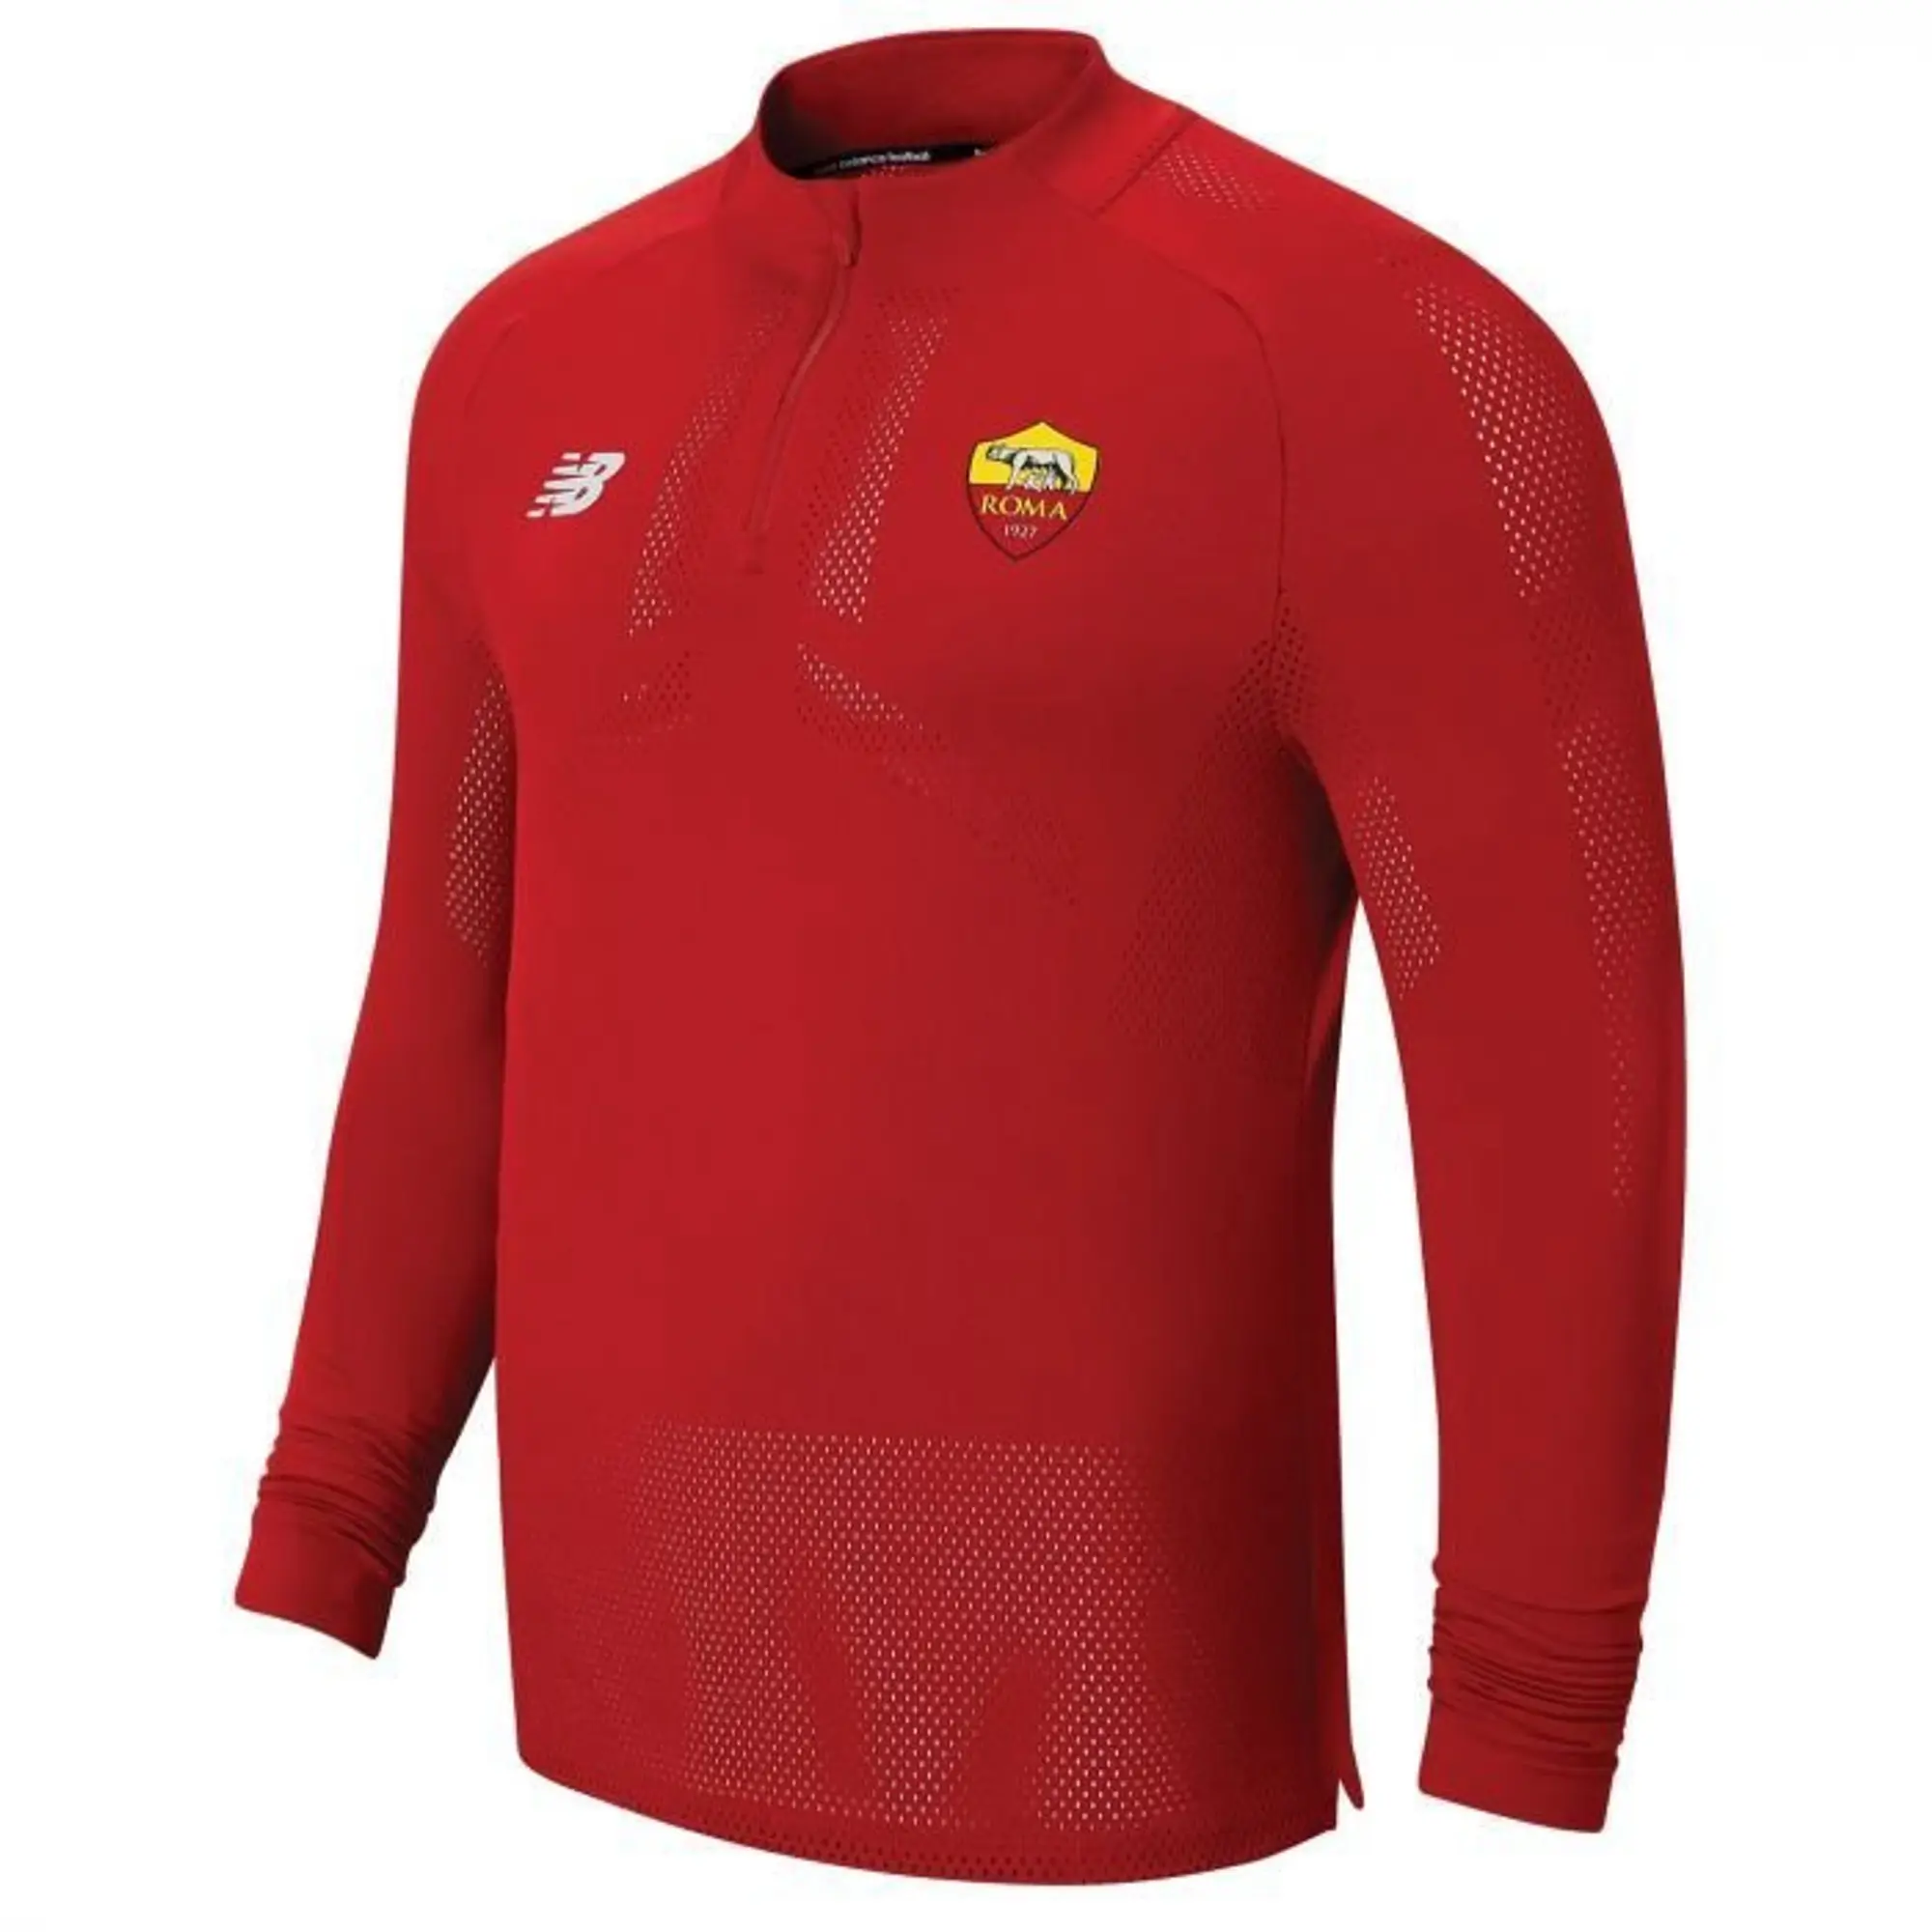 New Balance 2021-2022 Roma Drill Top (Red)